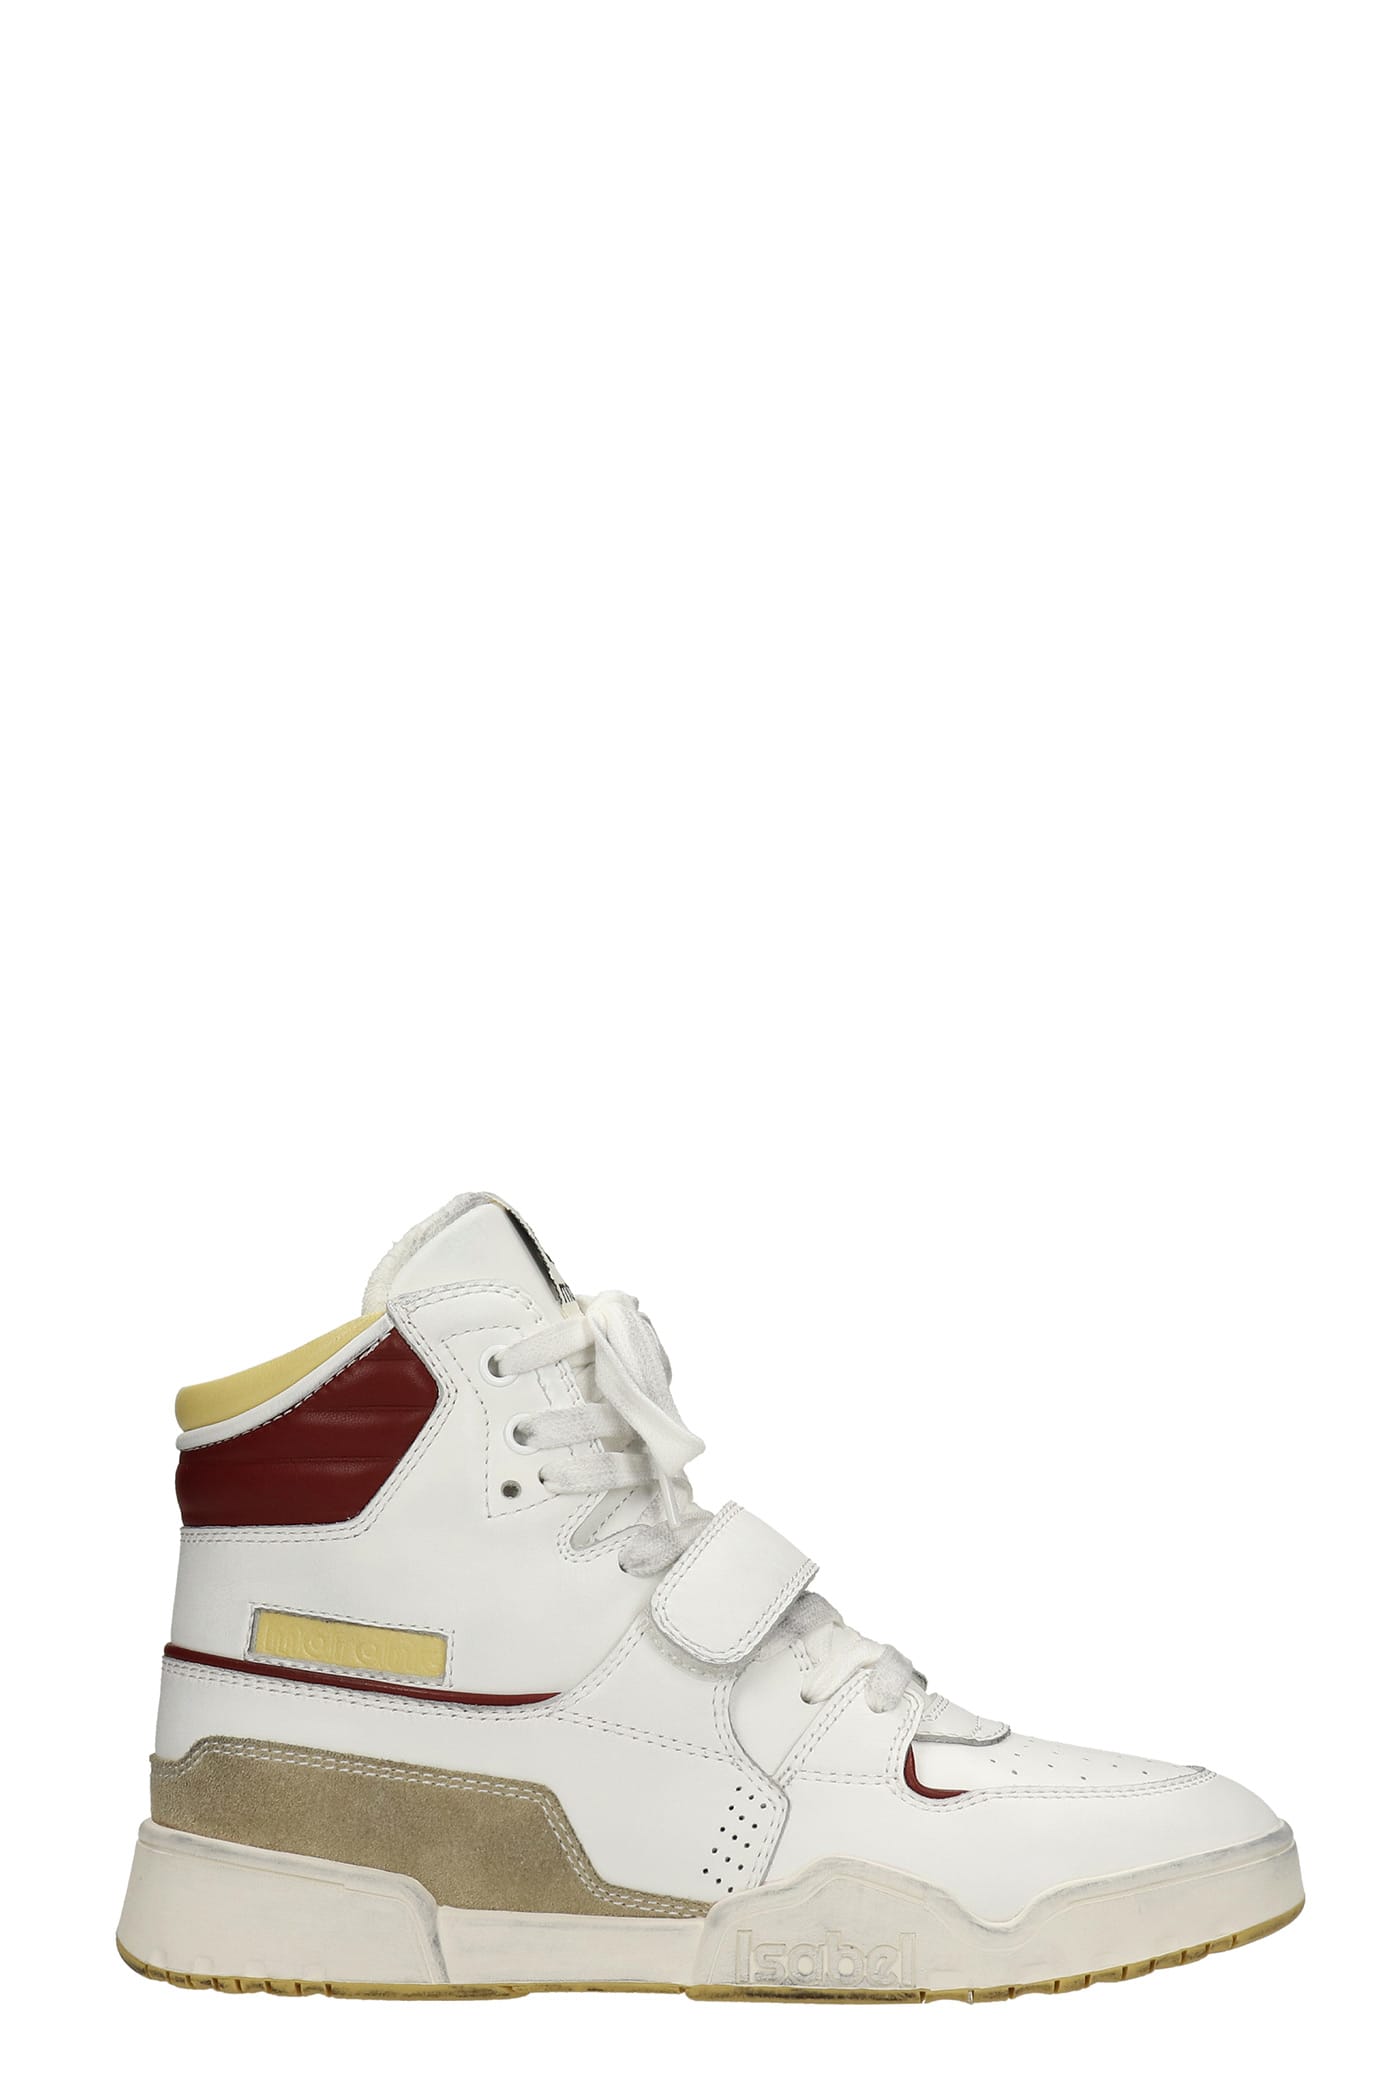 Isabel Marant Alsee Sneakers In White Suede And Leather